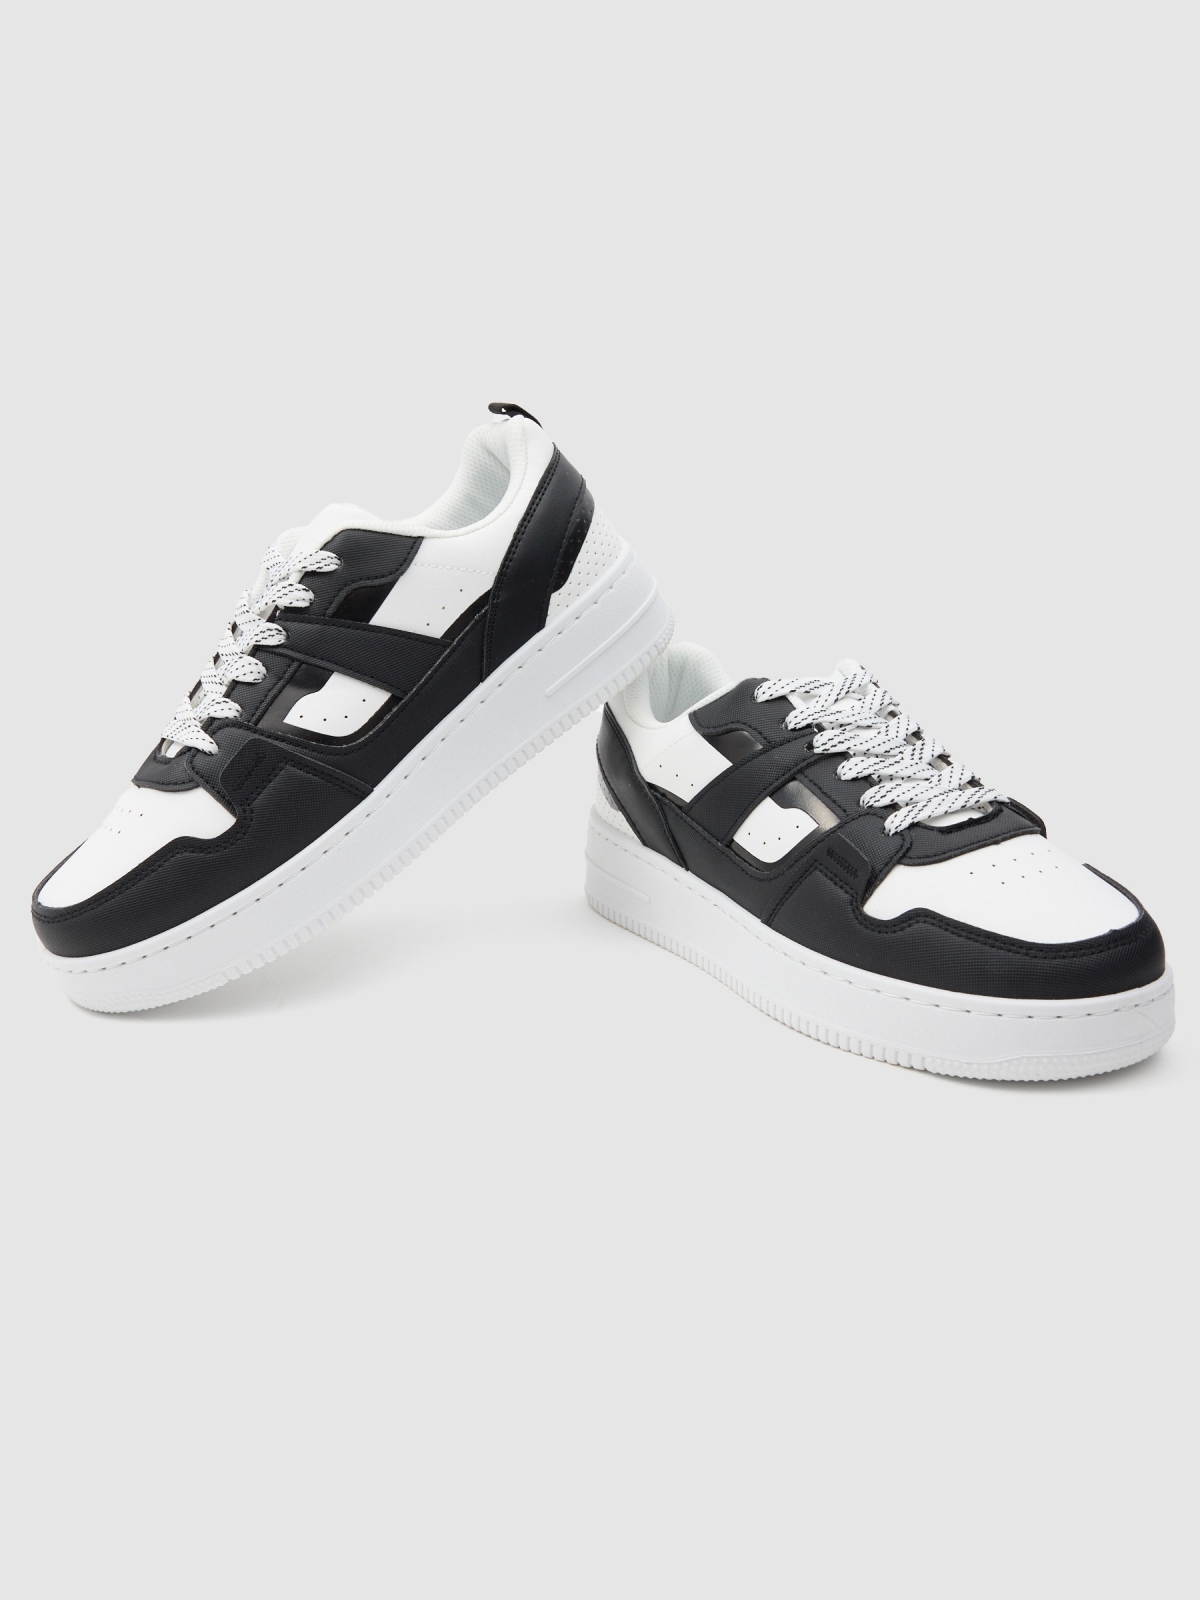 Black and white skater sneakers white detail view